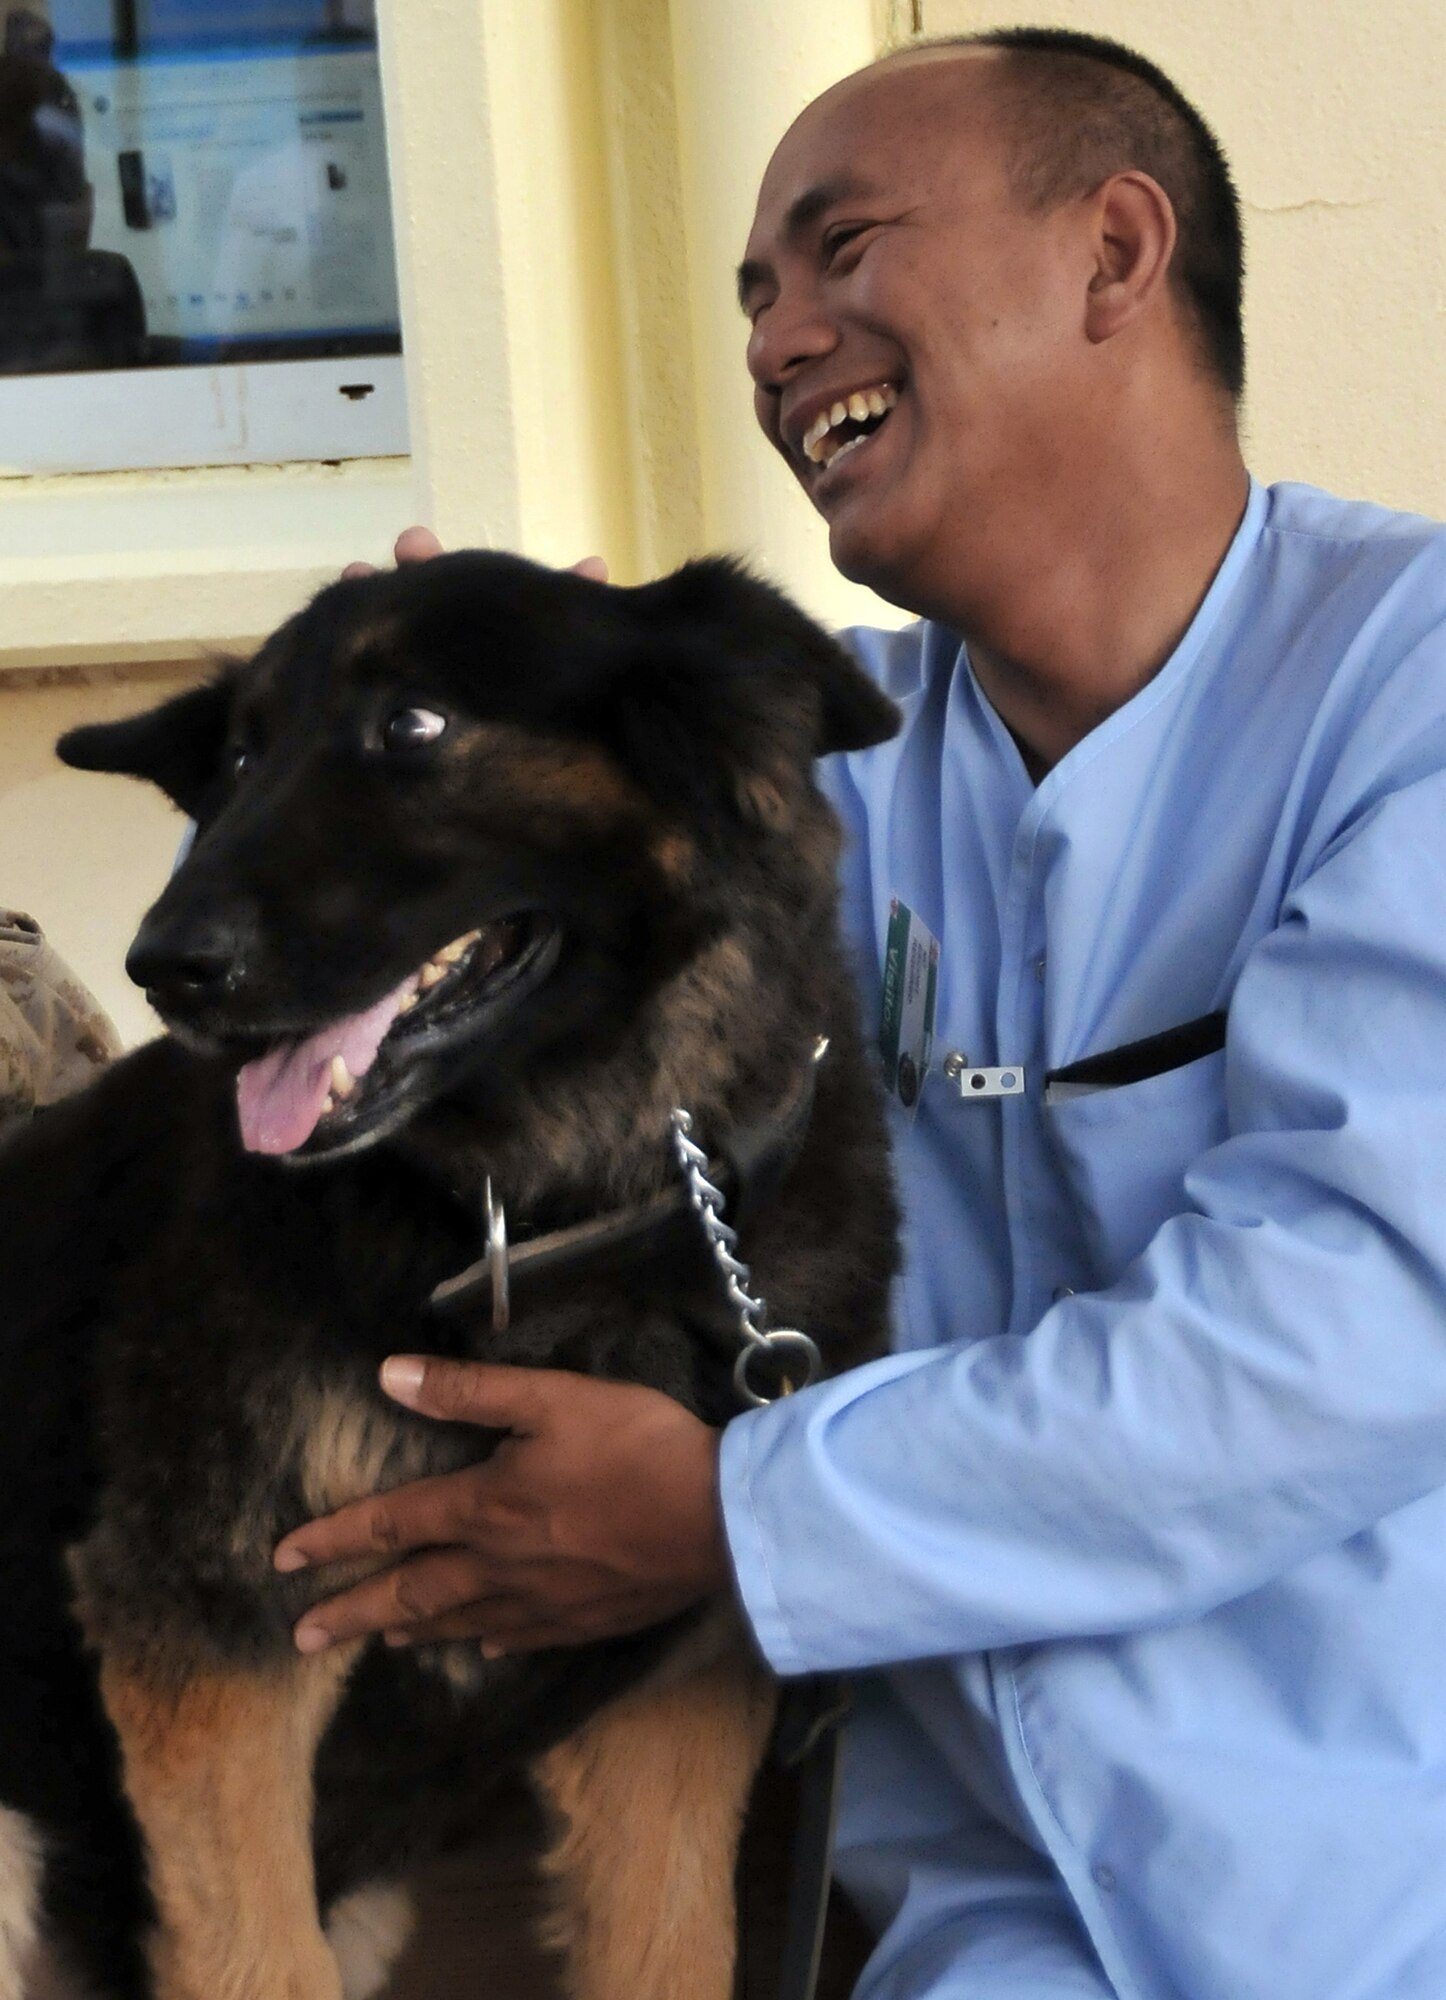 Army Spc. Than Kywe shares a laugh with Cezar, a 332nd Expeditionary Security Forces Group explosives-detection military working dog, during the first session of the K-9 Visitation Program May 15 at Joint Base Balad, Iraq. Specialist Kywe is an Air Force Theater Hospital patient. The program works to further patient recovery after injury or illness through animal-assisted therapy. (U.S. Air Force photo/Staff Sgt. Dilia Ayala) 
